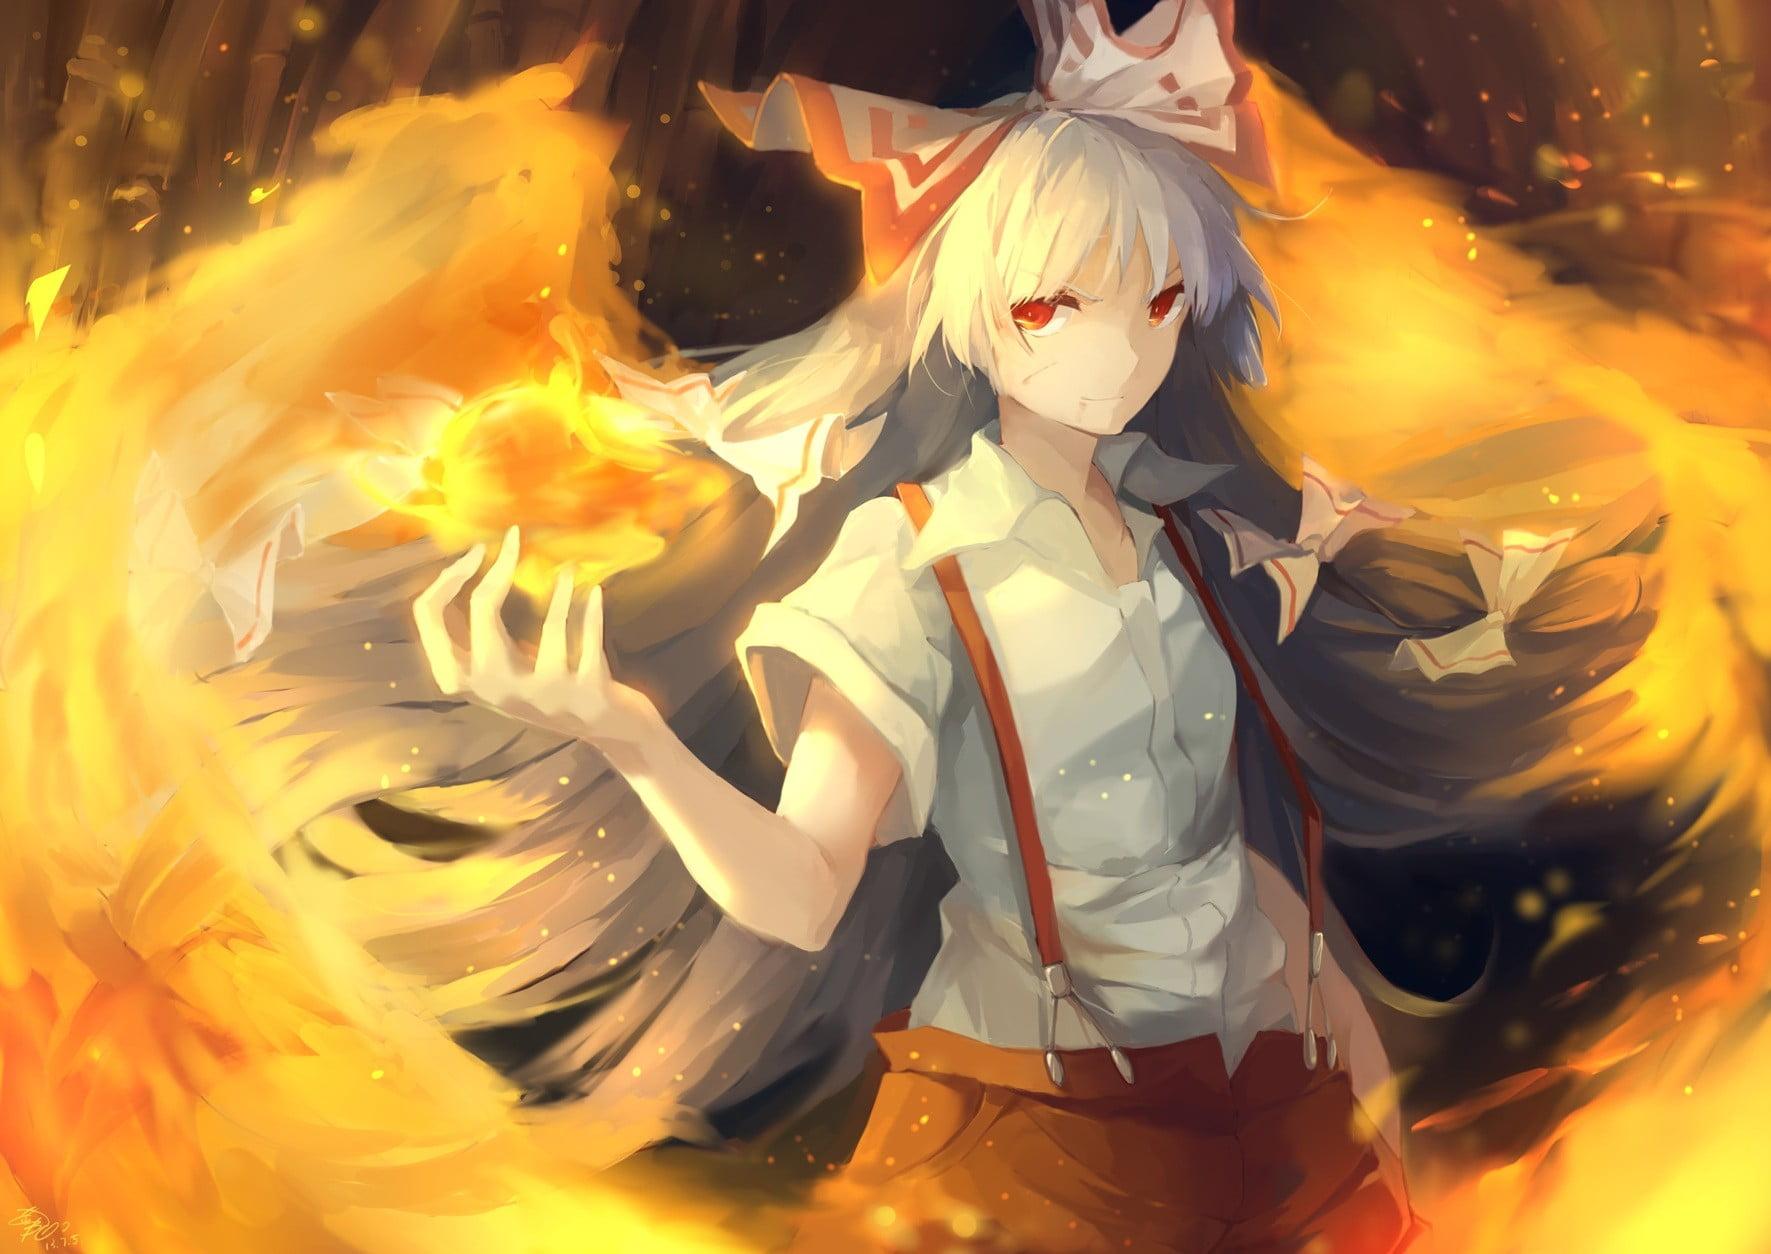 Fire Anime Wallpaper - Anime fire wallpaper. Anime Wallpapers for